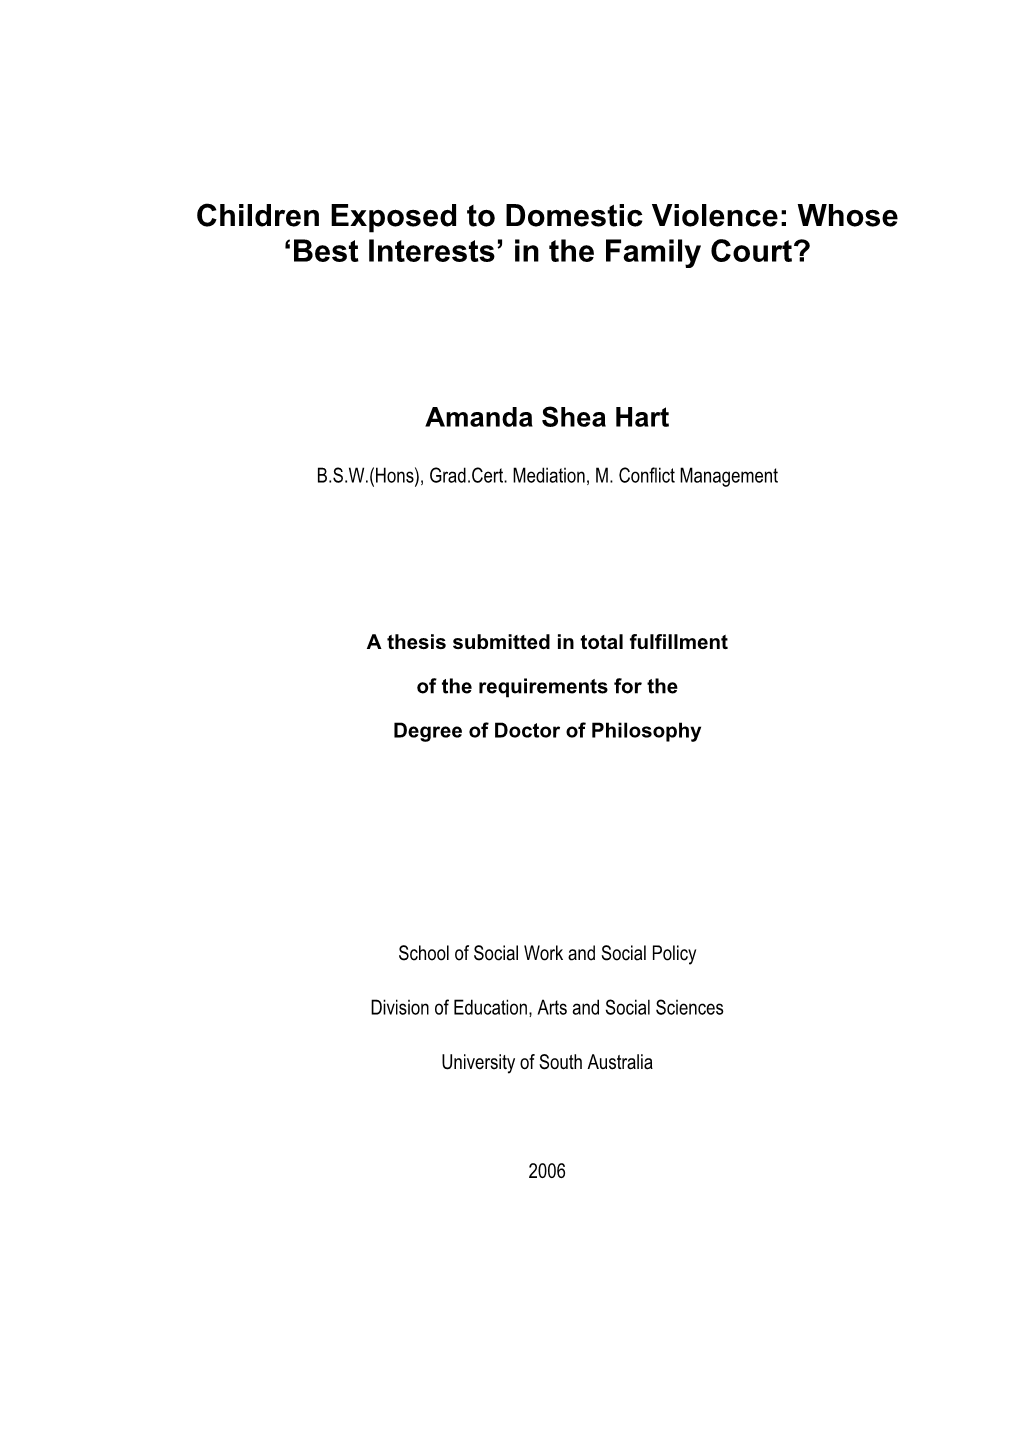 Children Exposed to Domestic Violence: Whose 'Best Interests' in the Family Court?